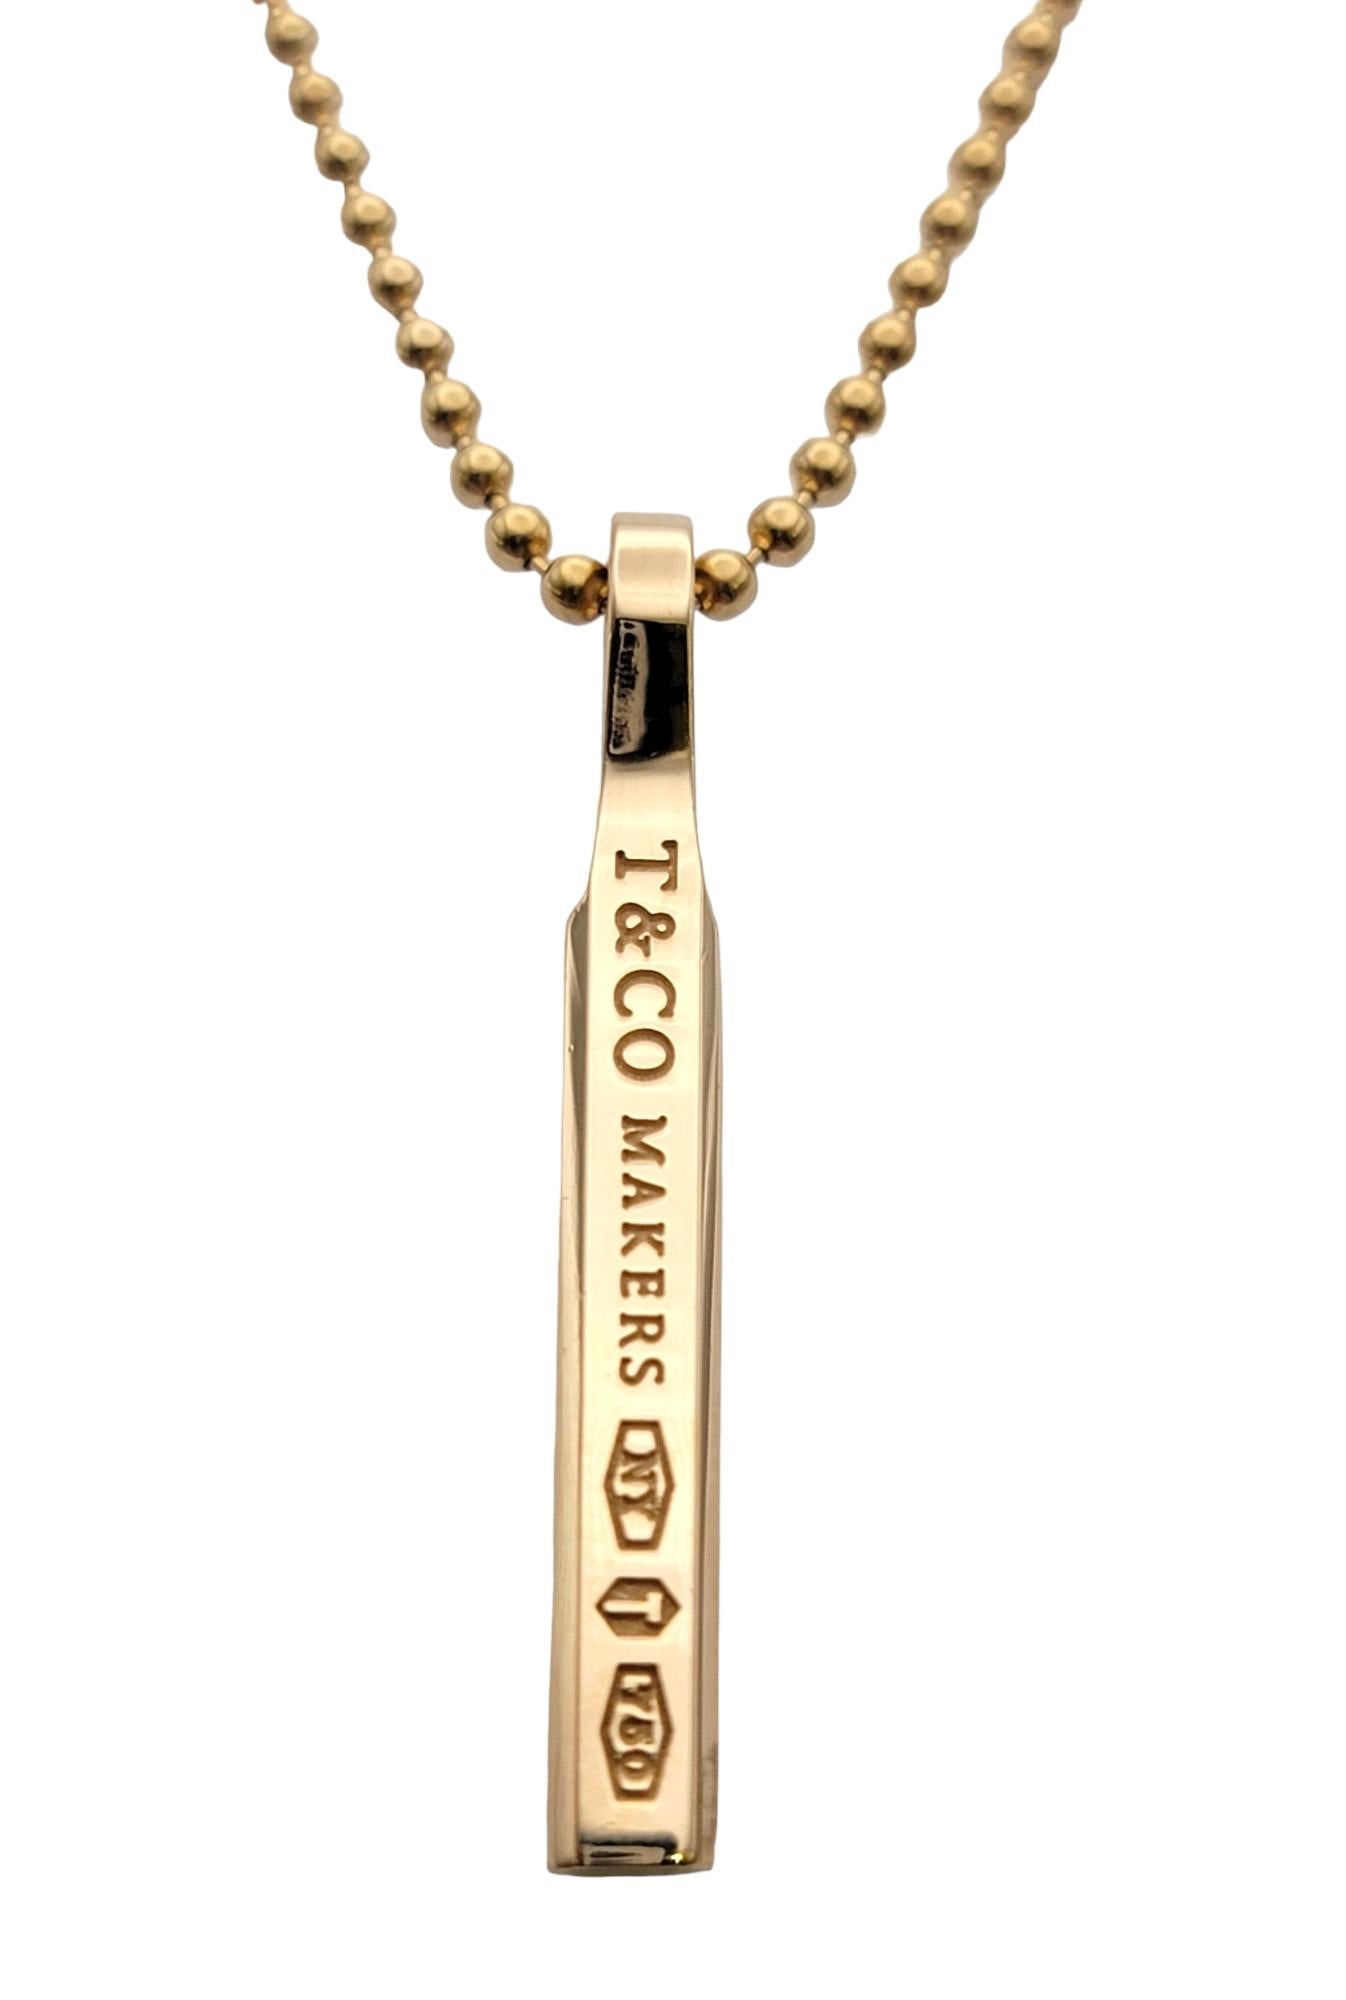 Contemporary Tiffany & Co. 18 Karat Rose Gold T & Co. Makers Vertical Bar Pendant Necklace